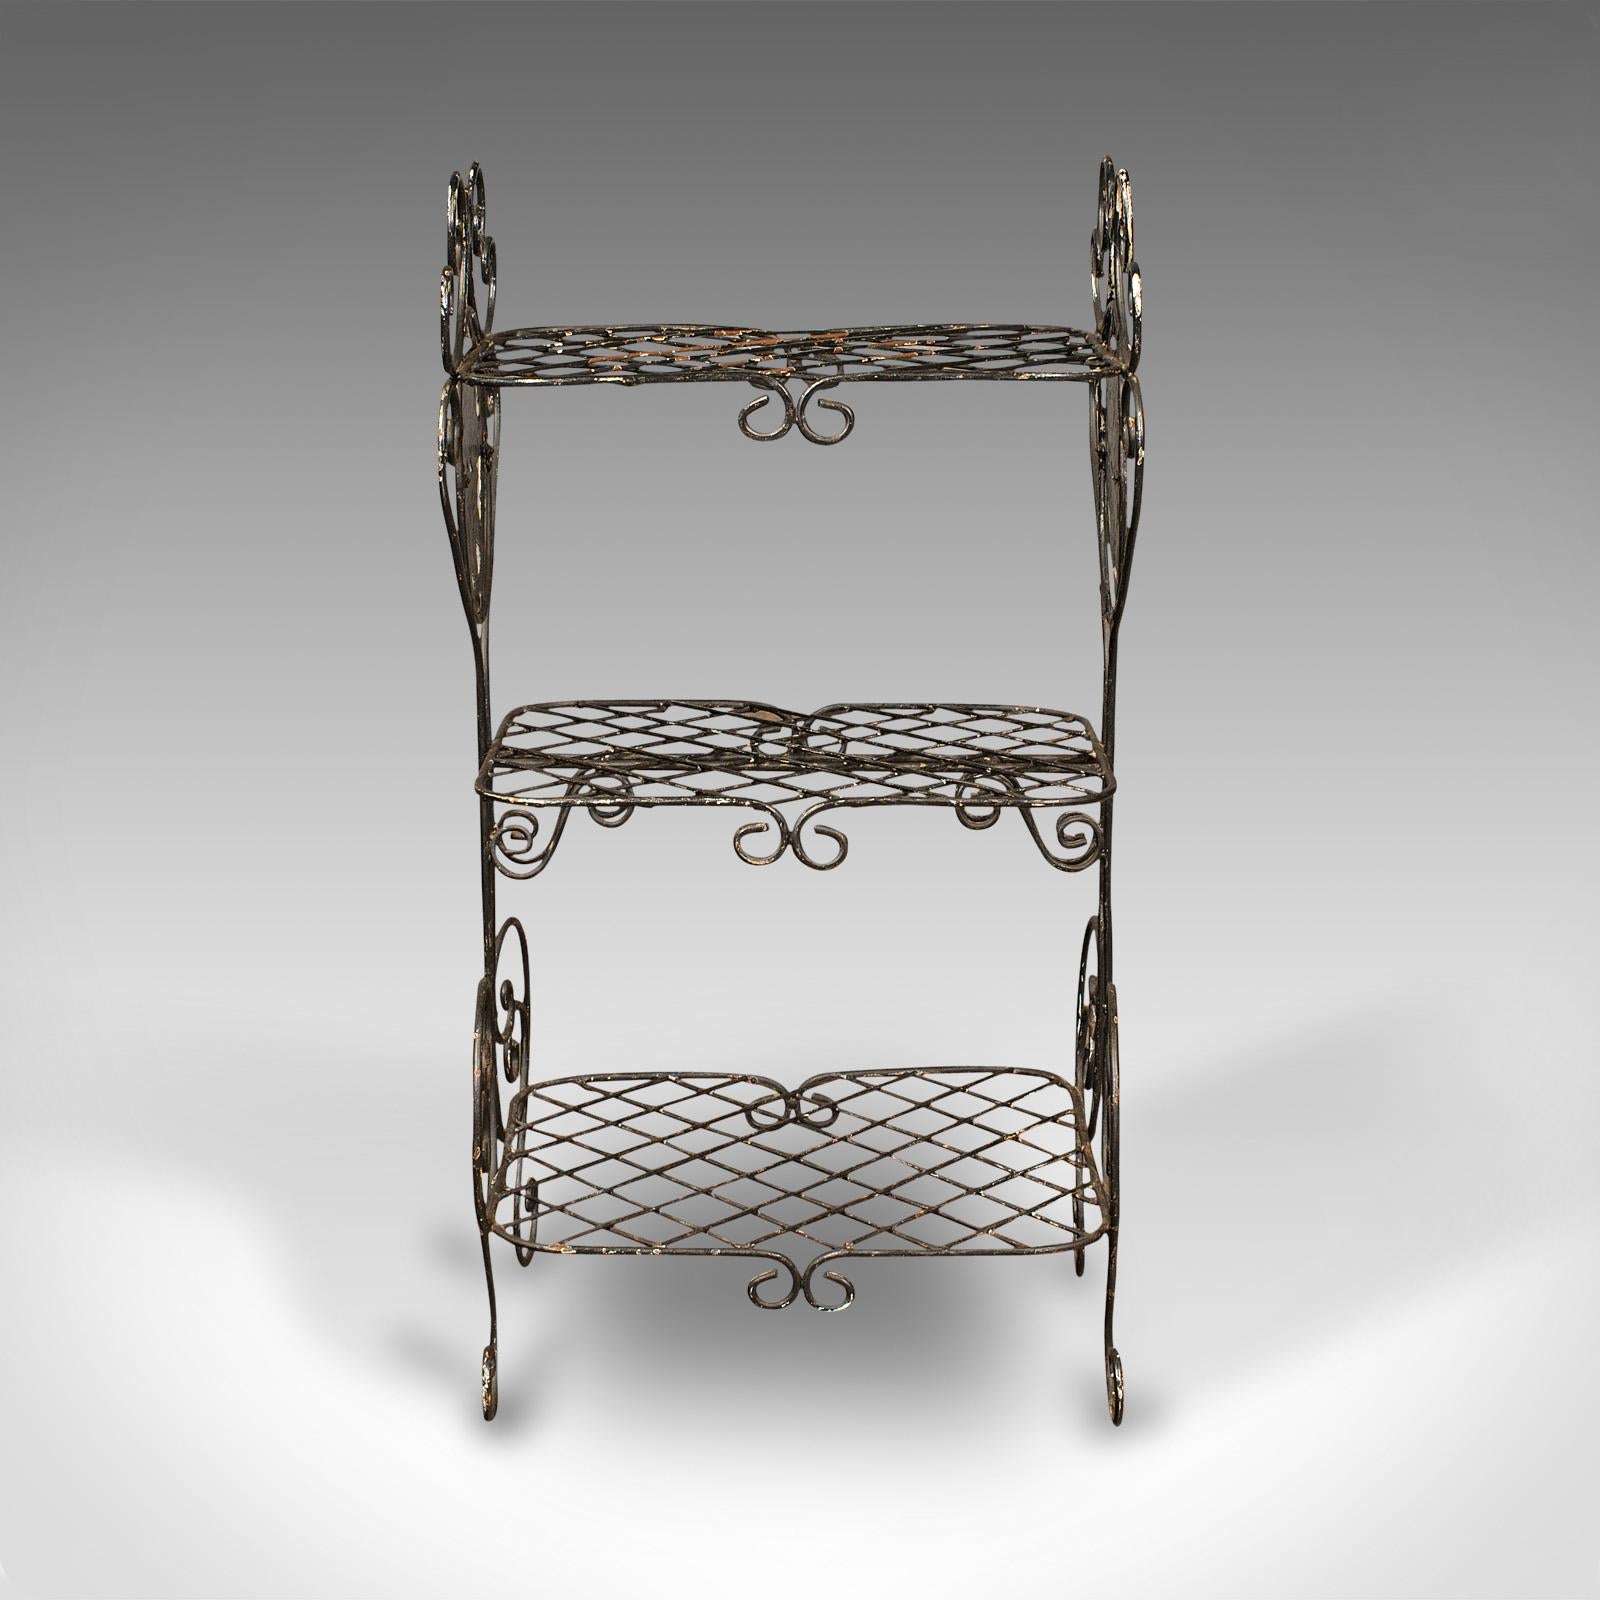 This is a vintage decorative planter stand. A French, wire work jardiniere or kitchen whatnot with Art Nouveau revival taste, dating to the mid 20th century, circa 1950.

Sinuous forms enhanced with hand-painted delight
Displays a desirable aged